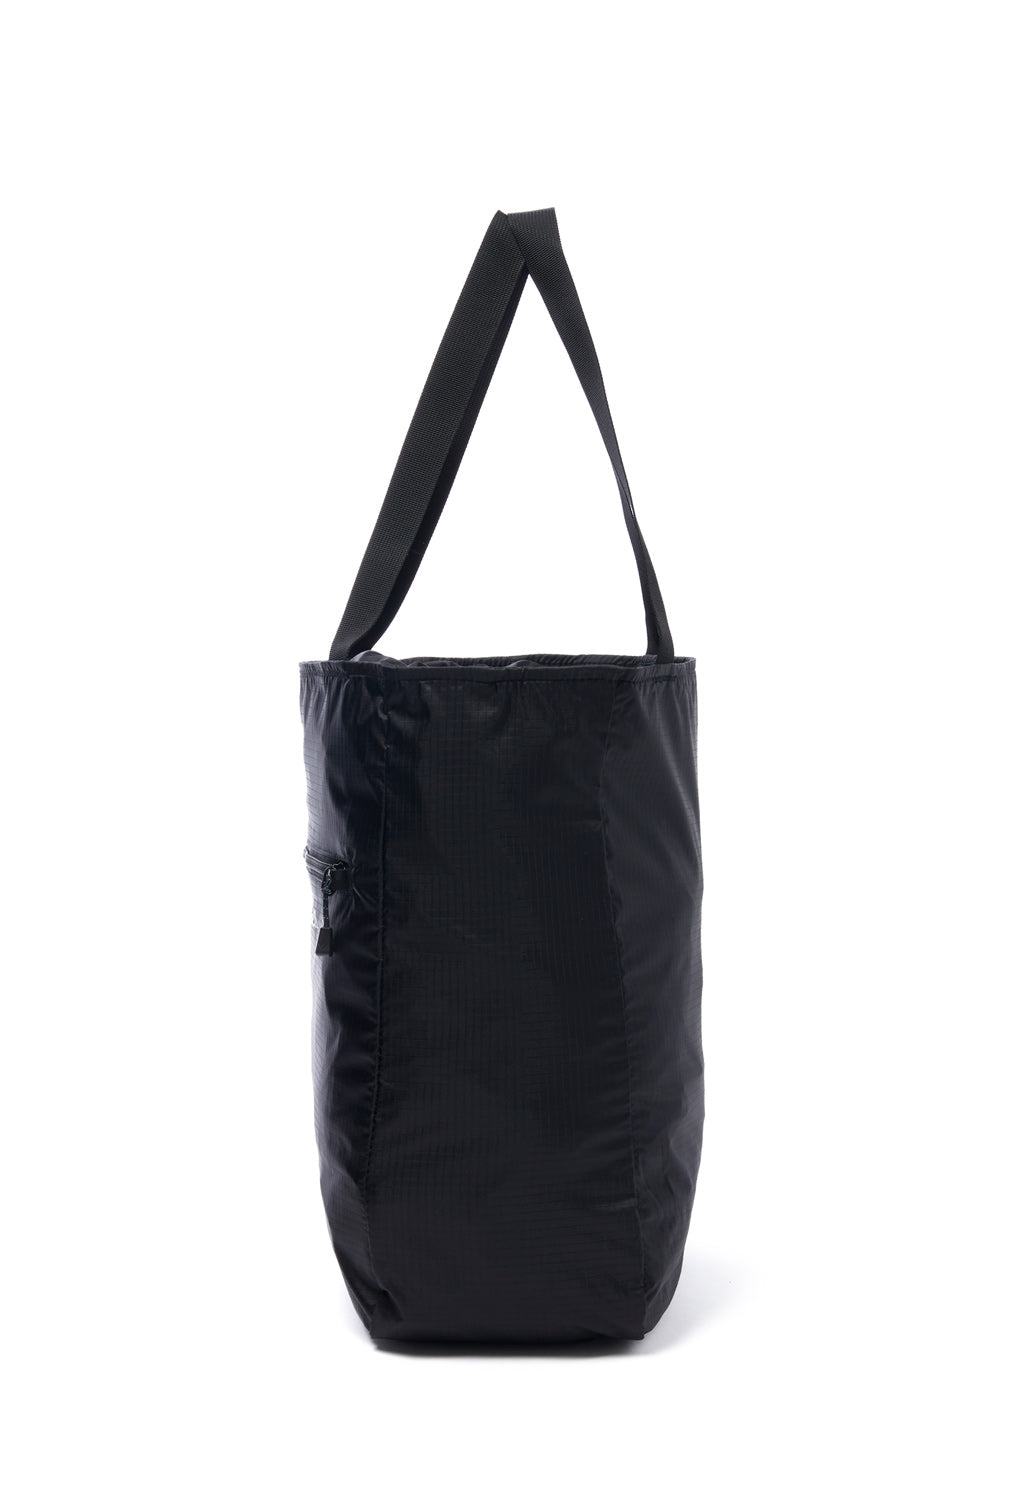 Montbell Pocketable Light Tote Small - Black